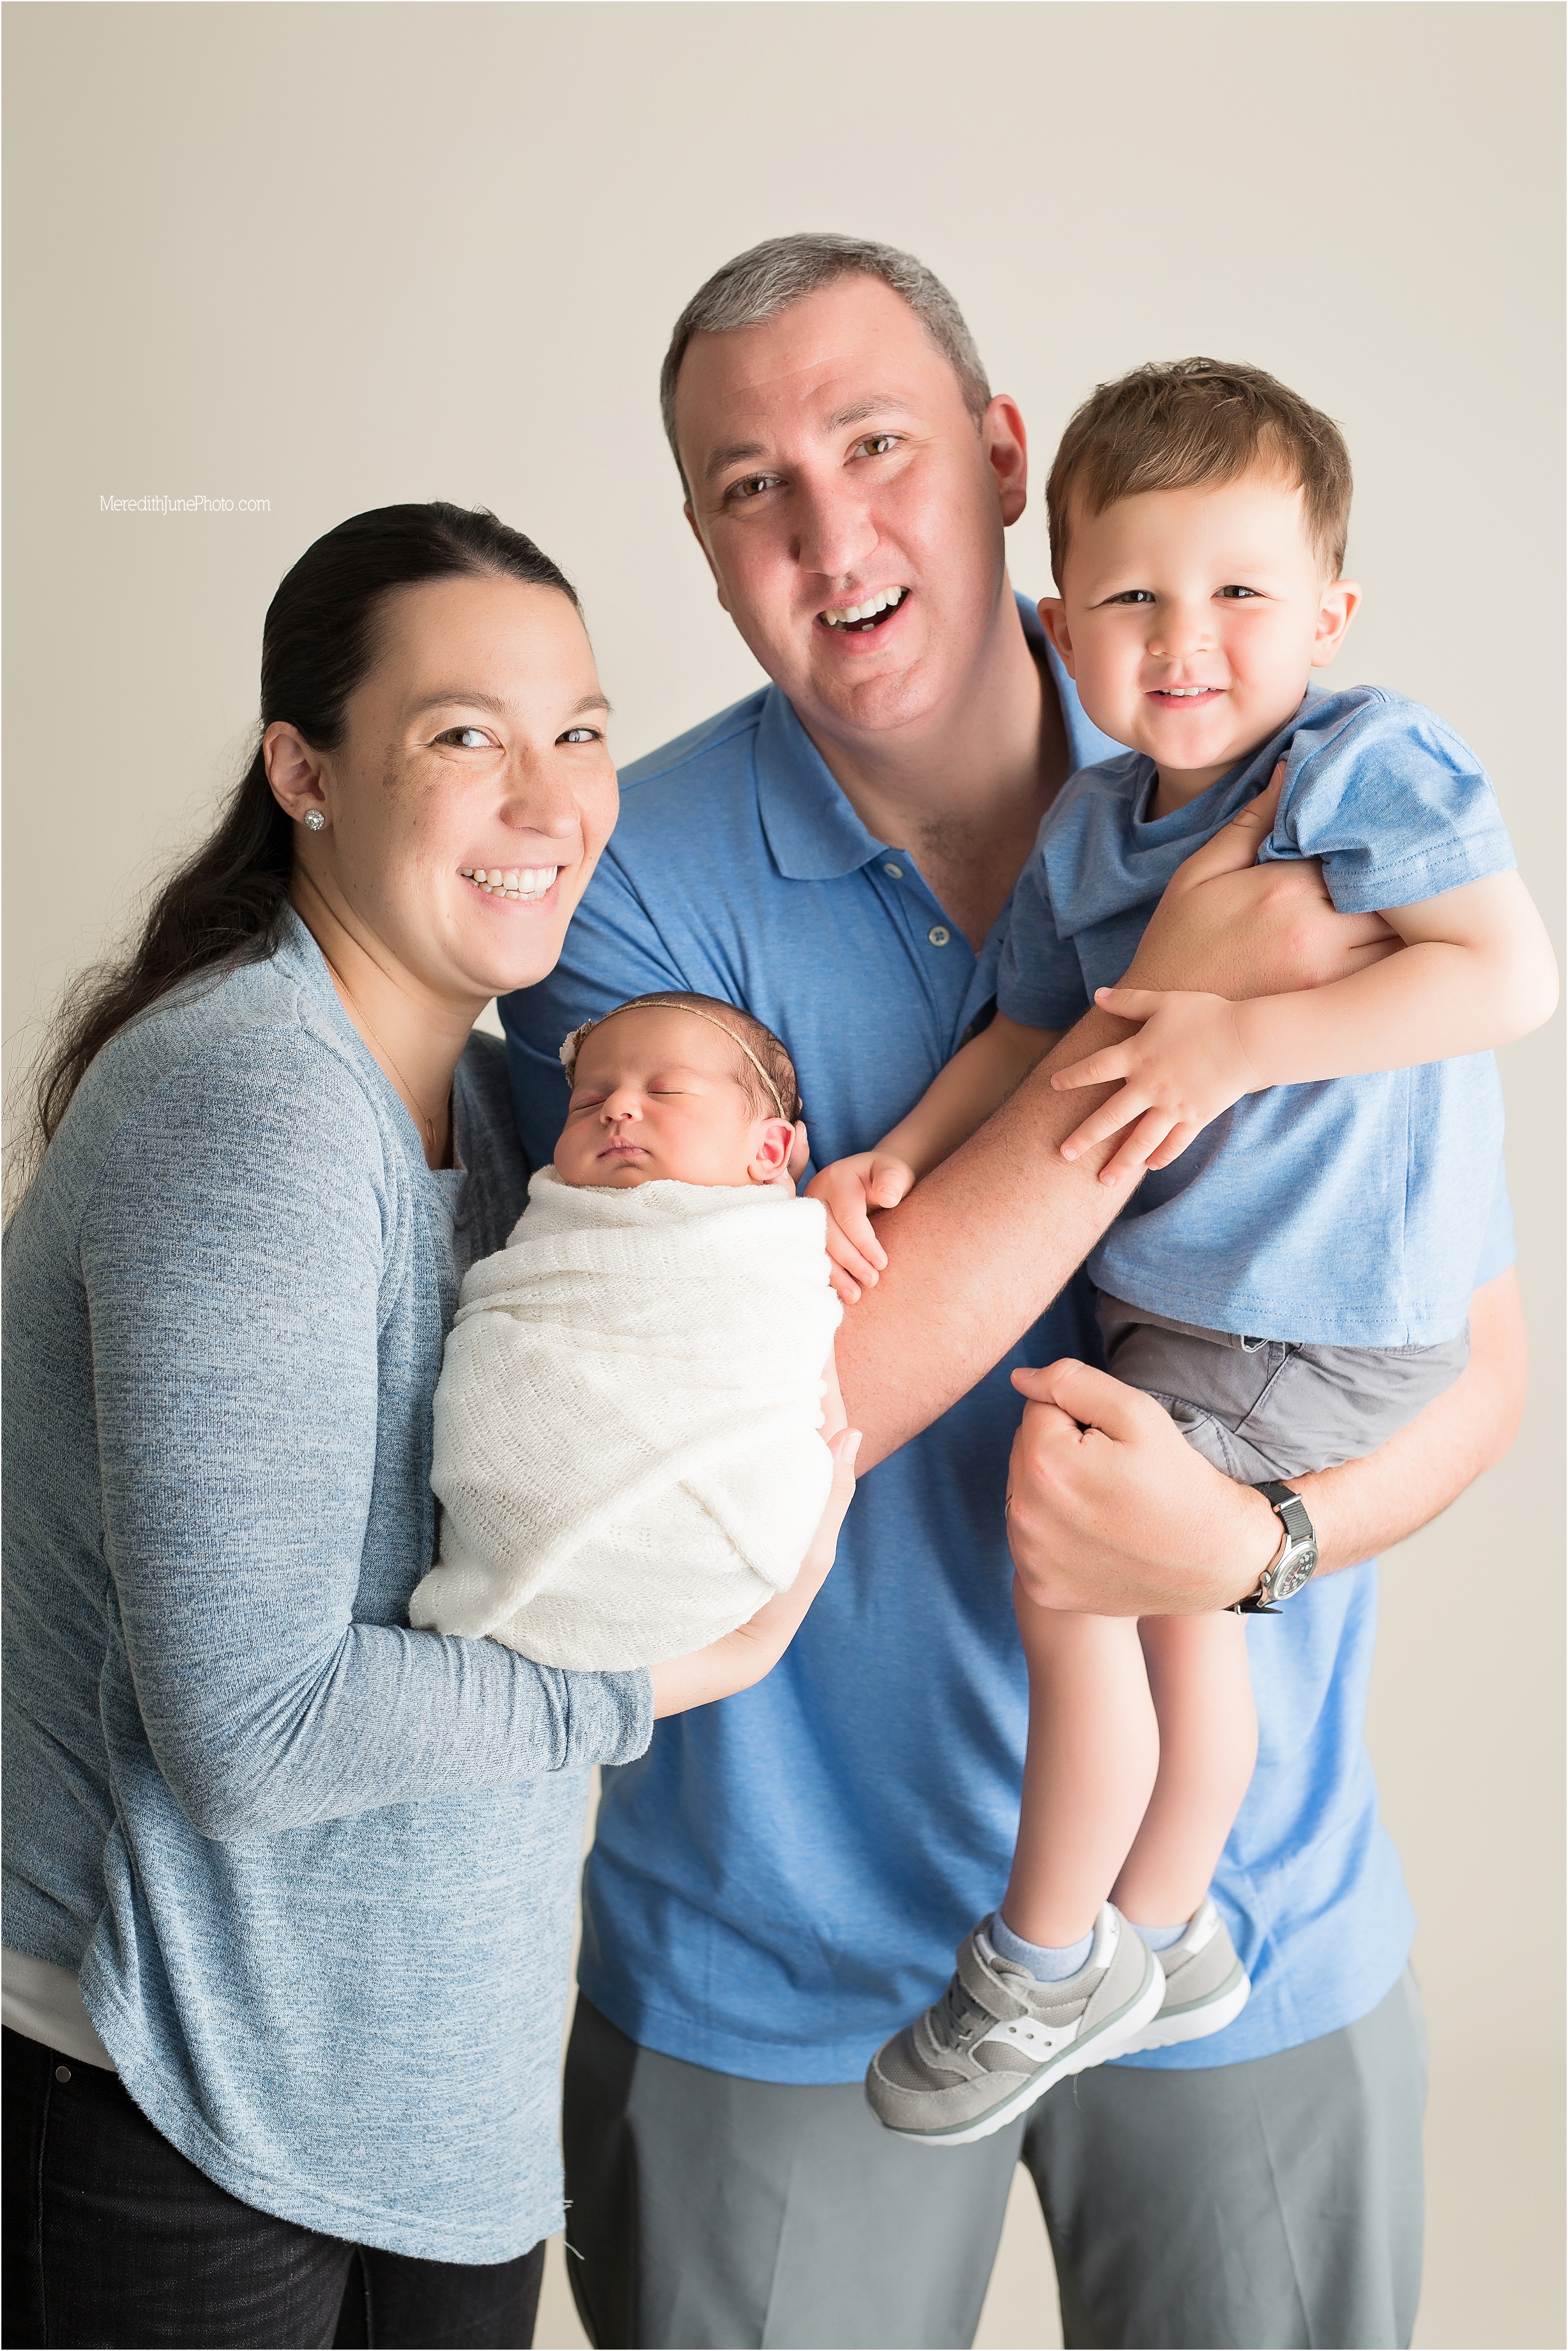 Baby Danielle with family during newborn session